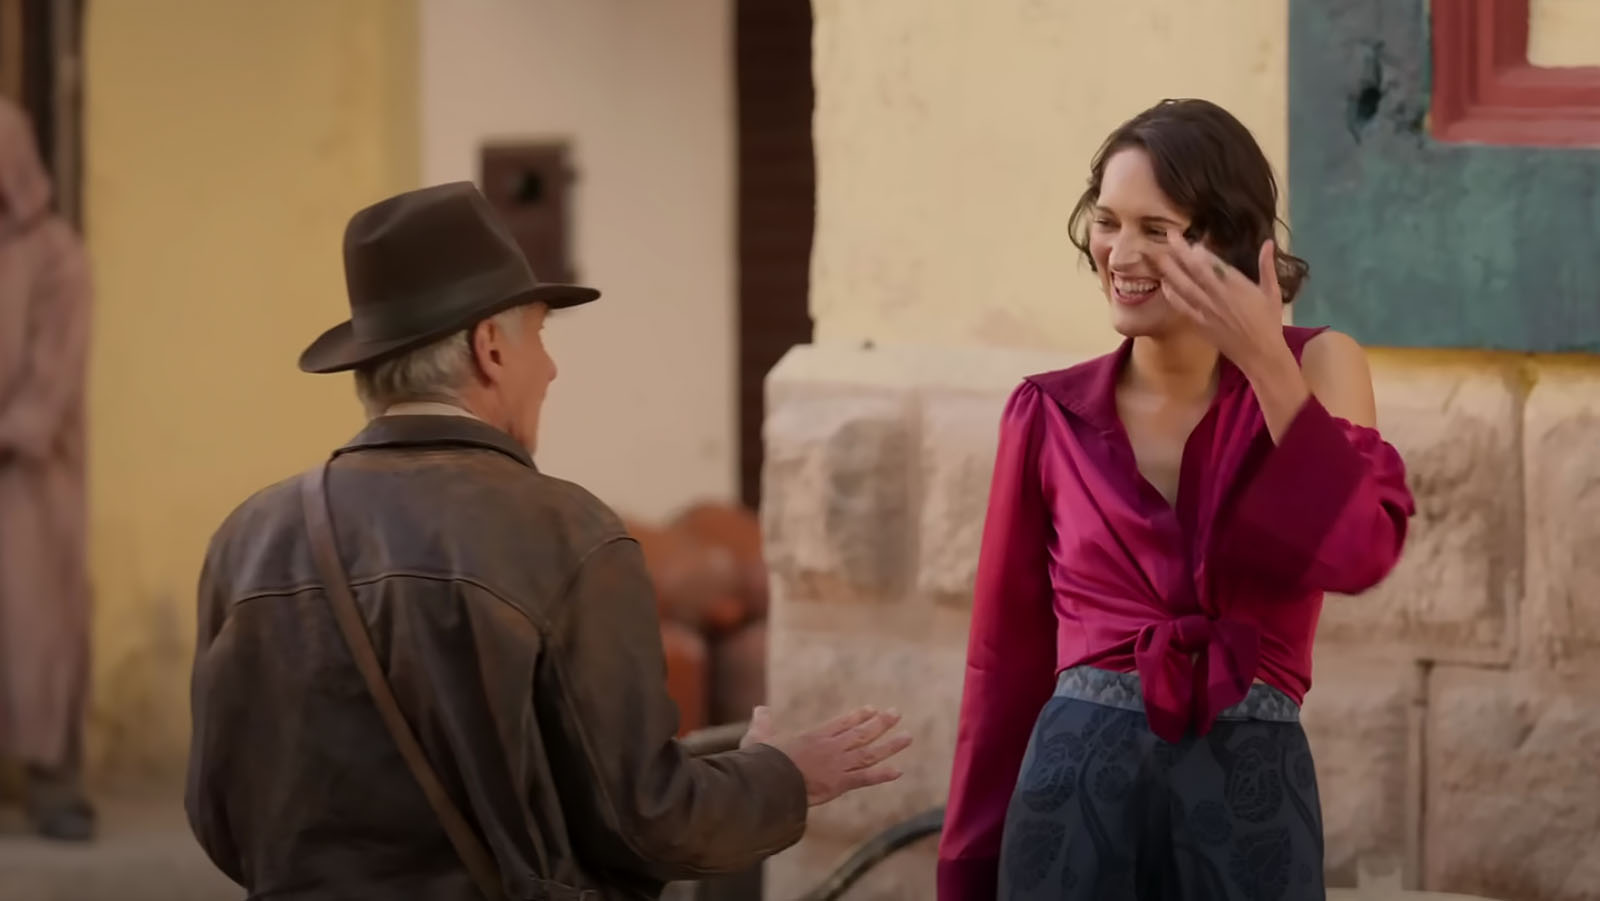 Harrison Ford and Phoebe Waller-Bridge share a moment on location for Dial of Destiny.